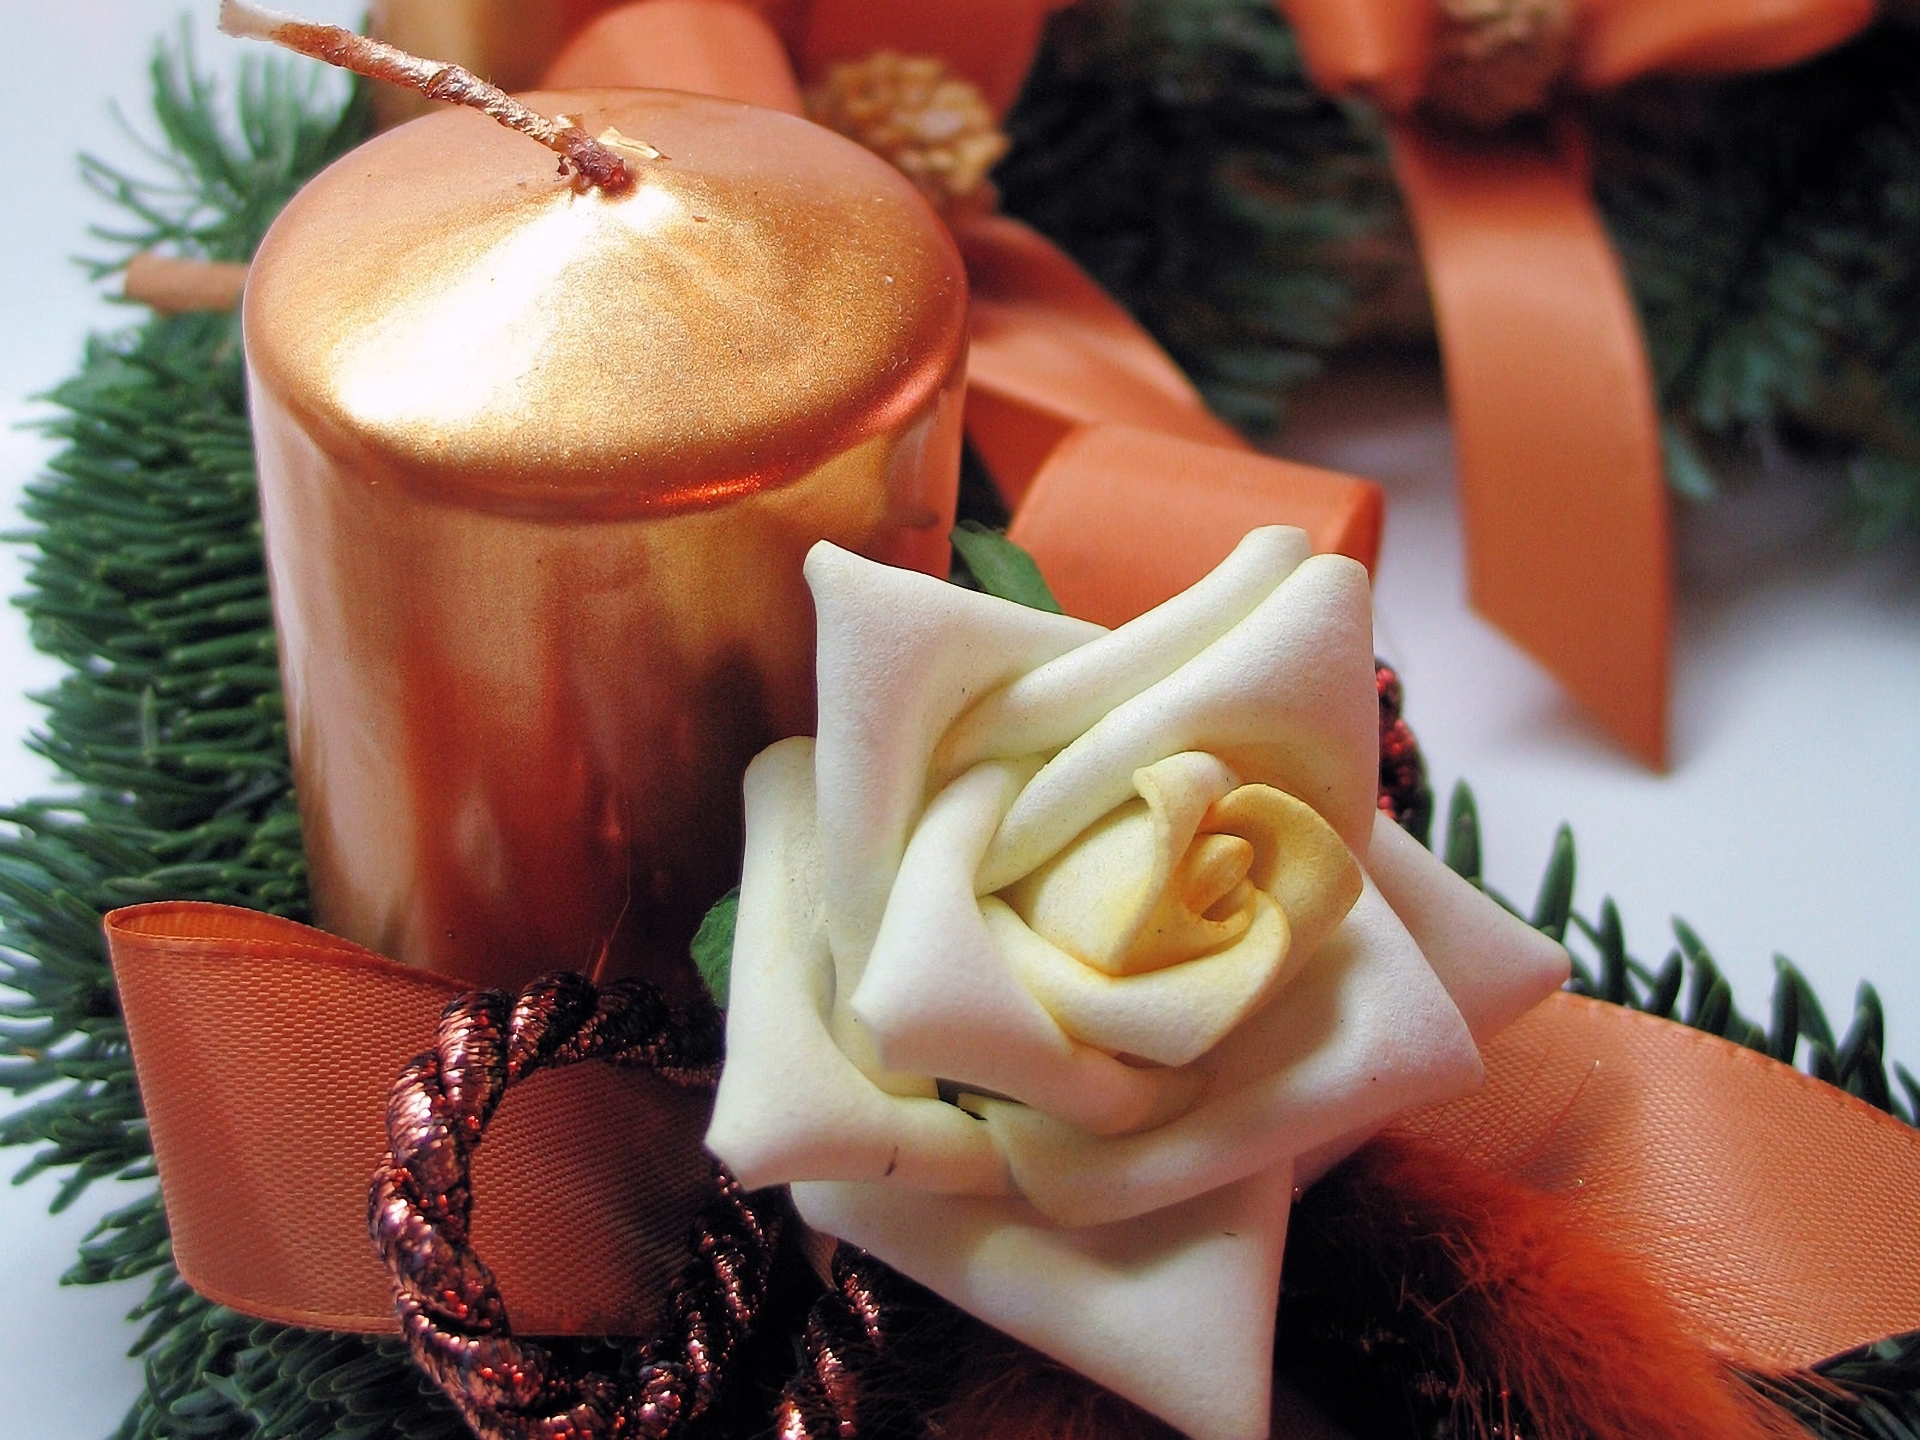 Candle Christmas Decoration Flower Rose 1920x1440